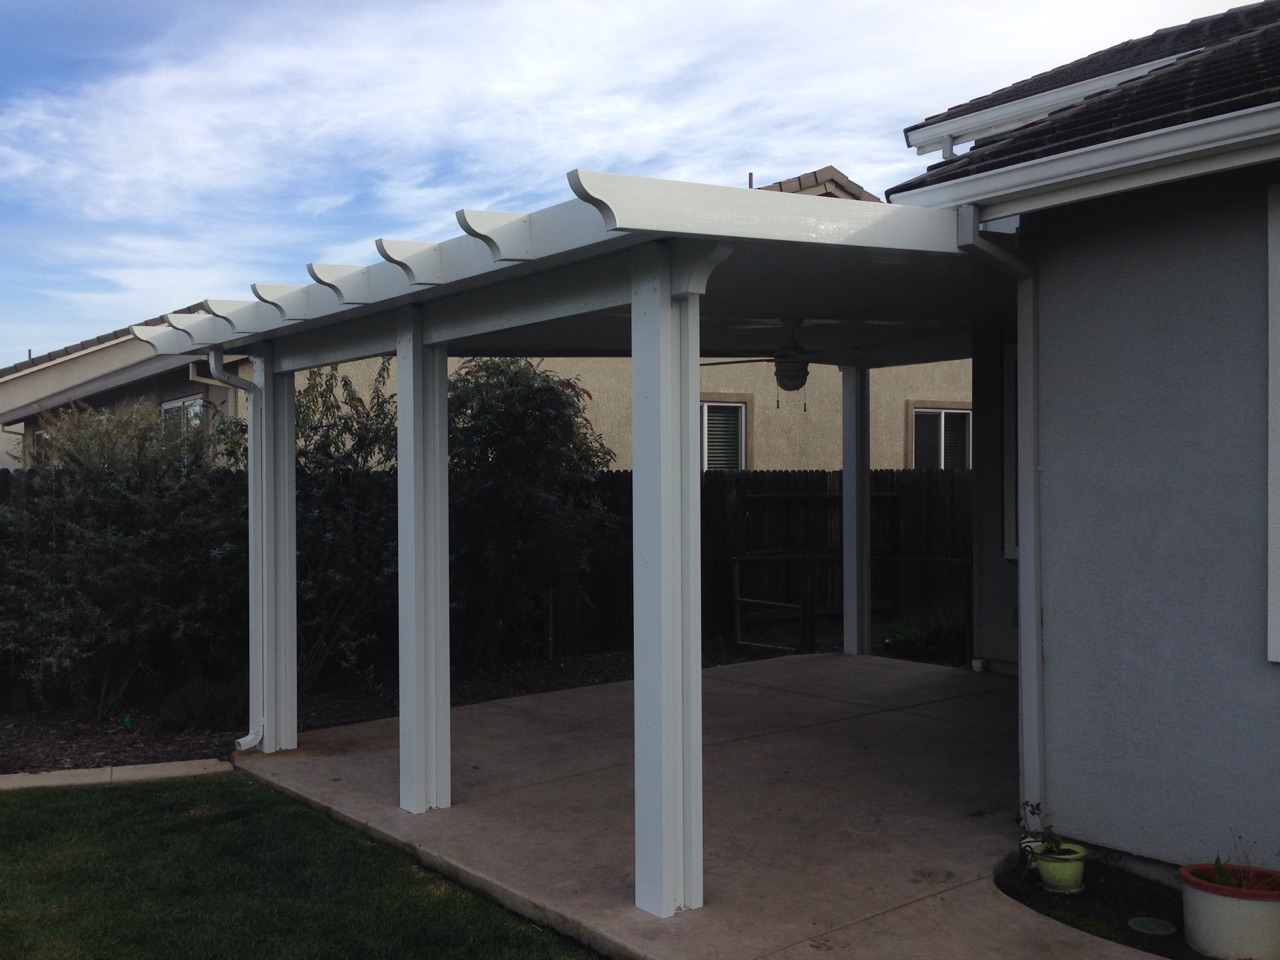 Flatwood Patio Cover West Sacramento Ca with regard to measurements 1280 X 960